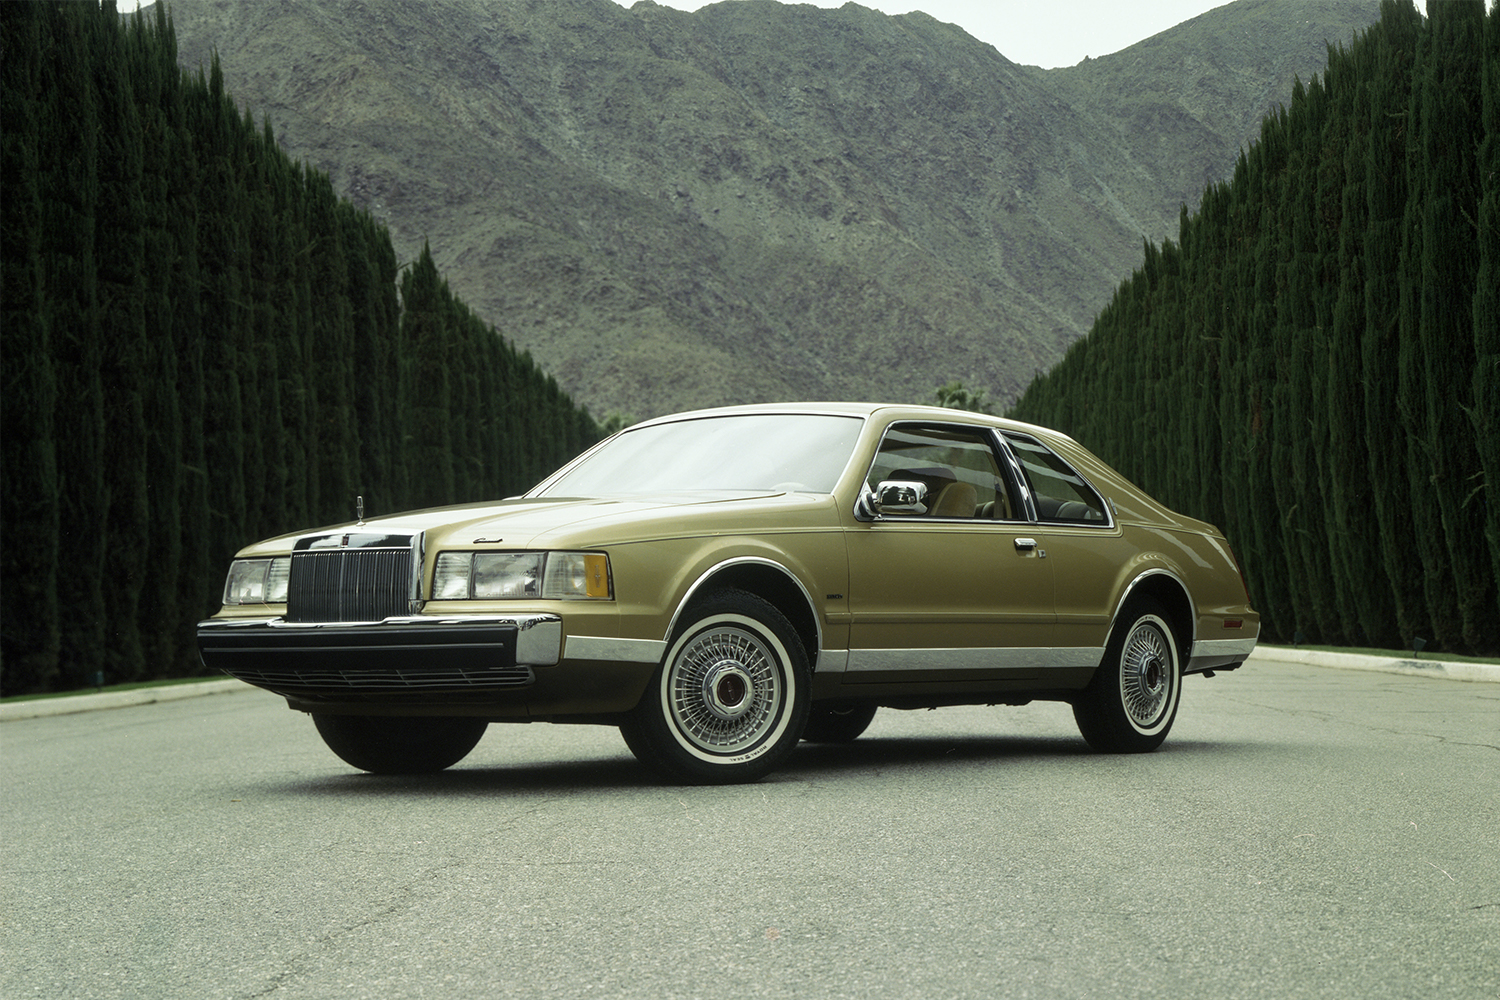 A 1984 Lincoln Continental Mark VII, before the V8 was introduced